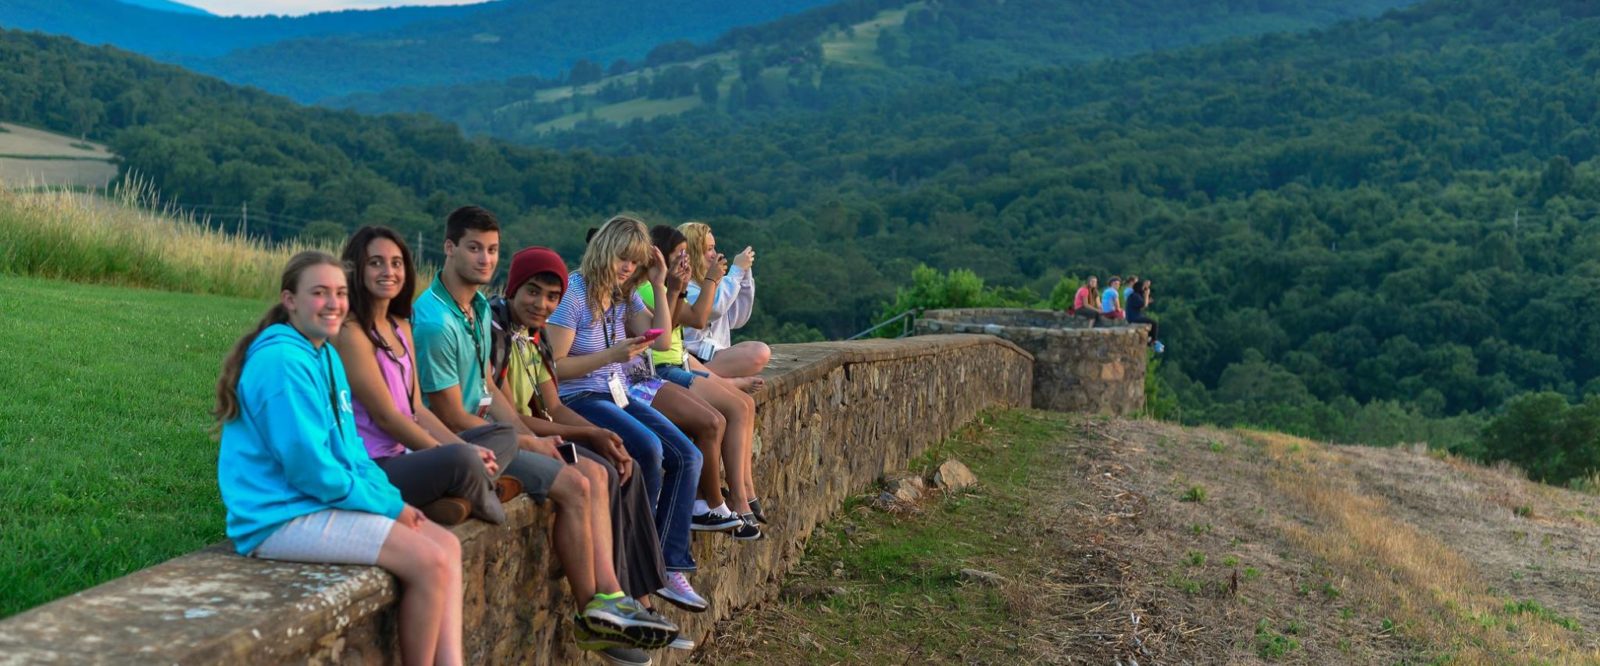 Students sit along a stone wall looking out over a mountain view